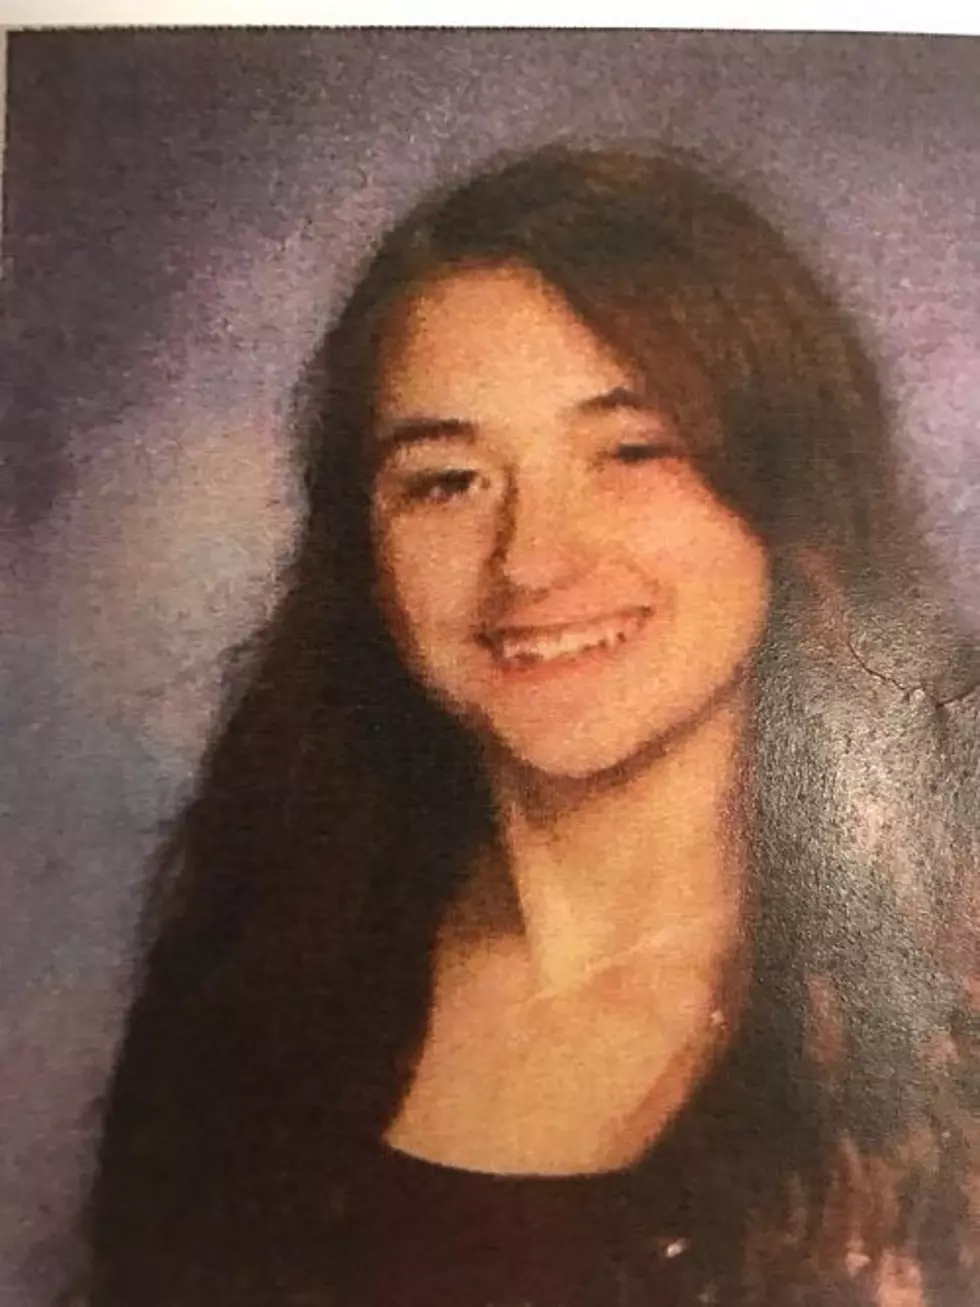 Search begins for missing Manalapan Township girl